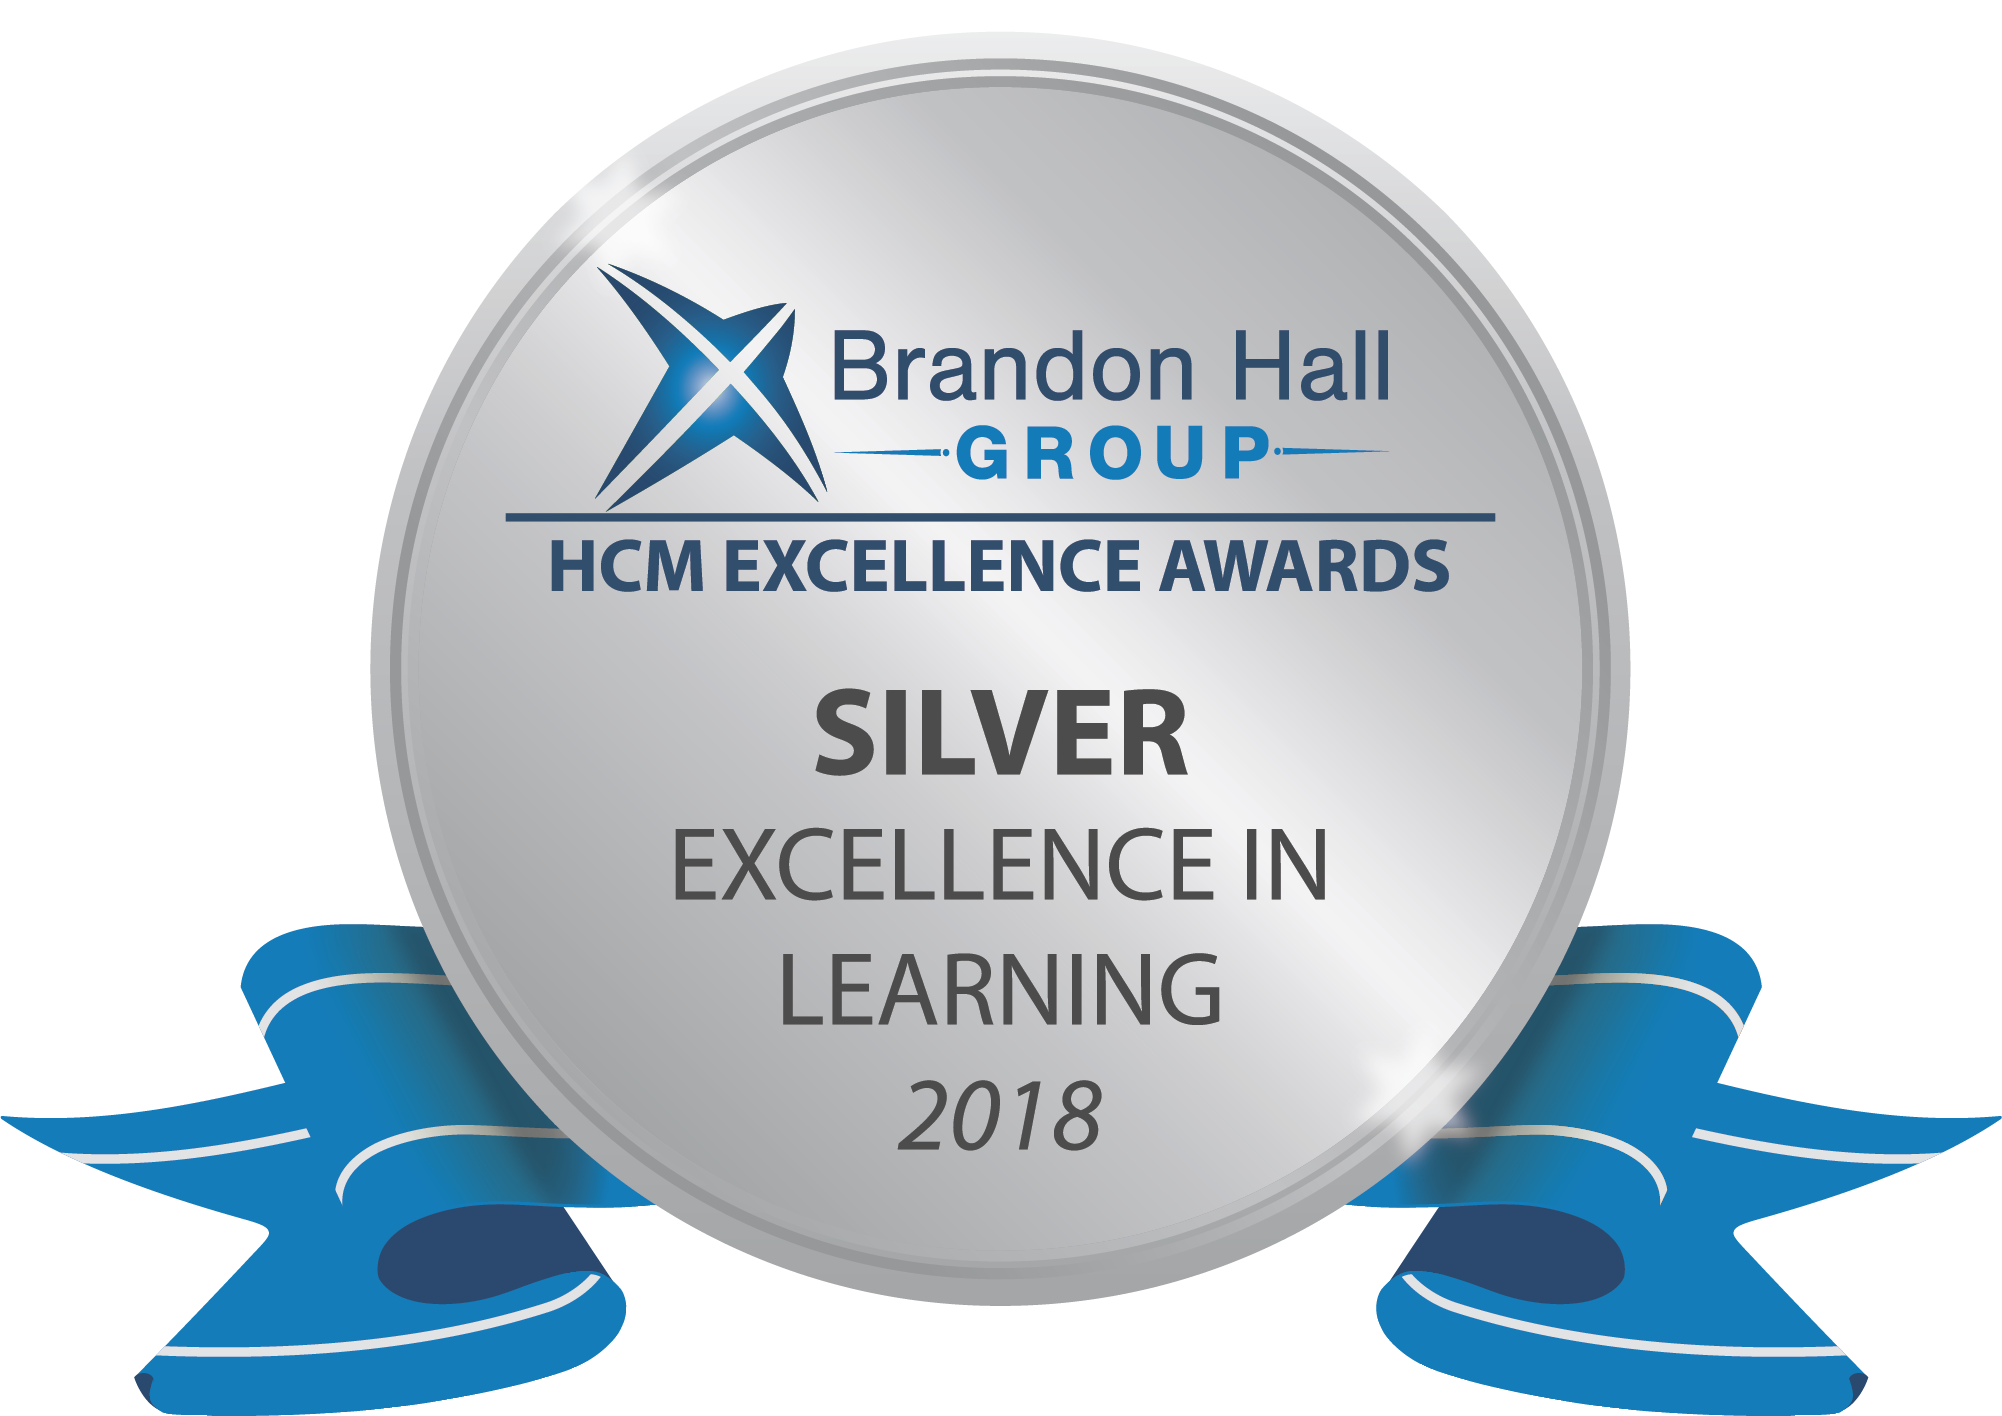 Silver-Learning-Award-2018 (1).png